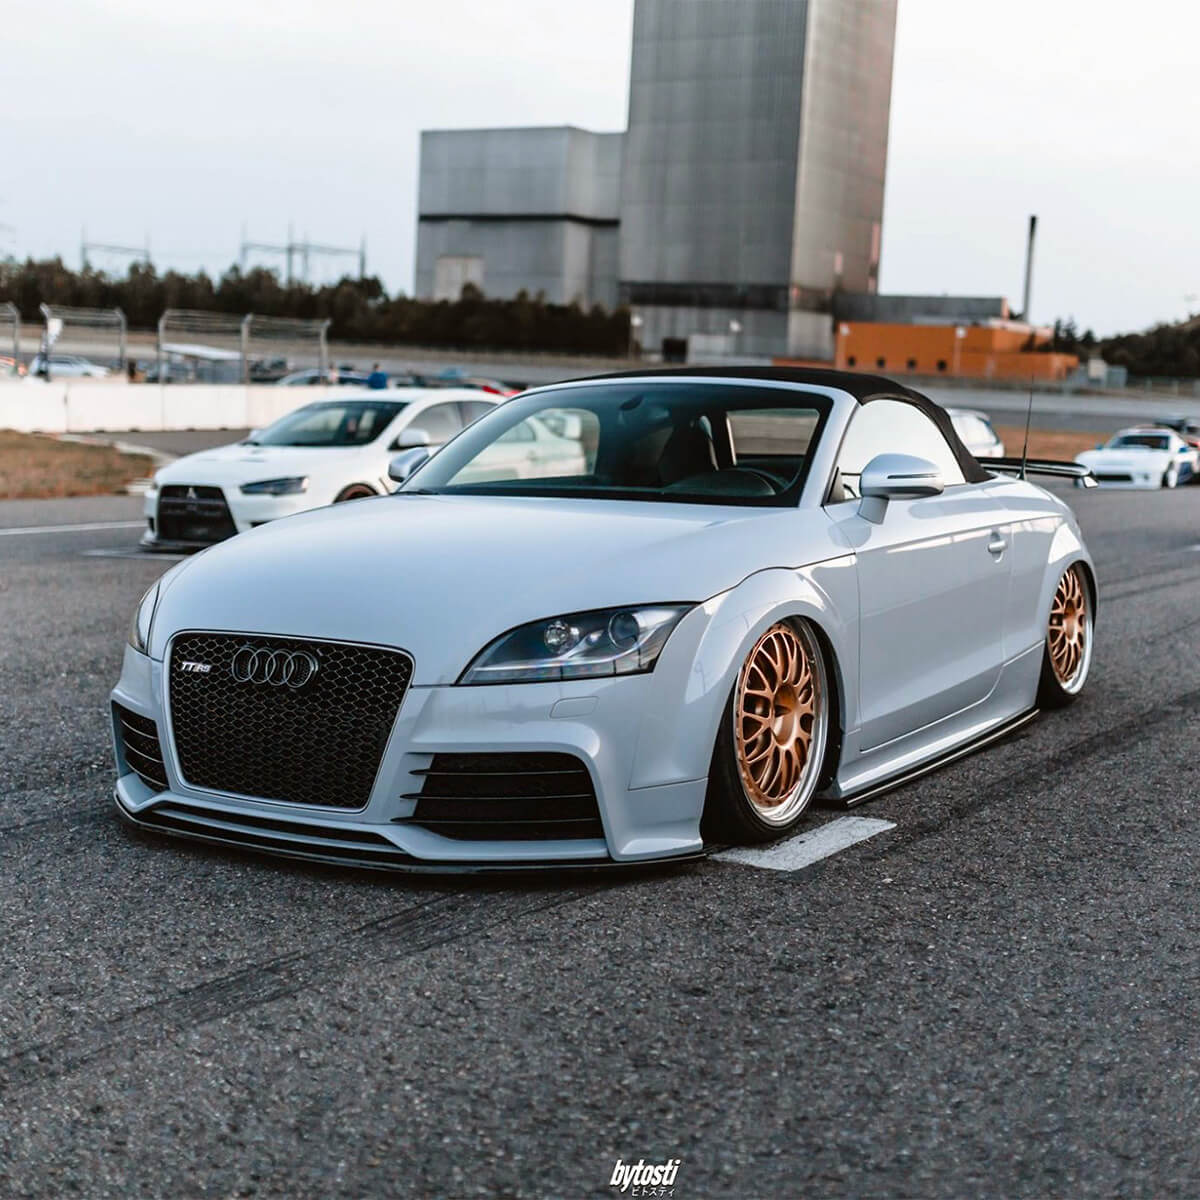 Audi TT RS with Ingo Noak frontspoiler and Side skirts